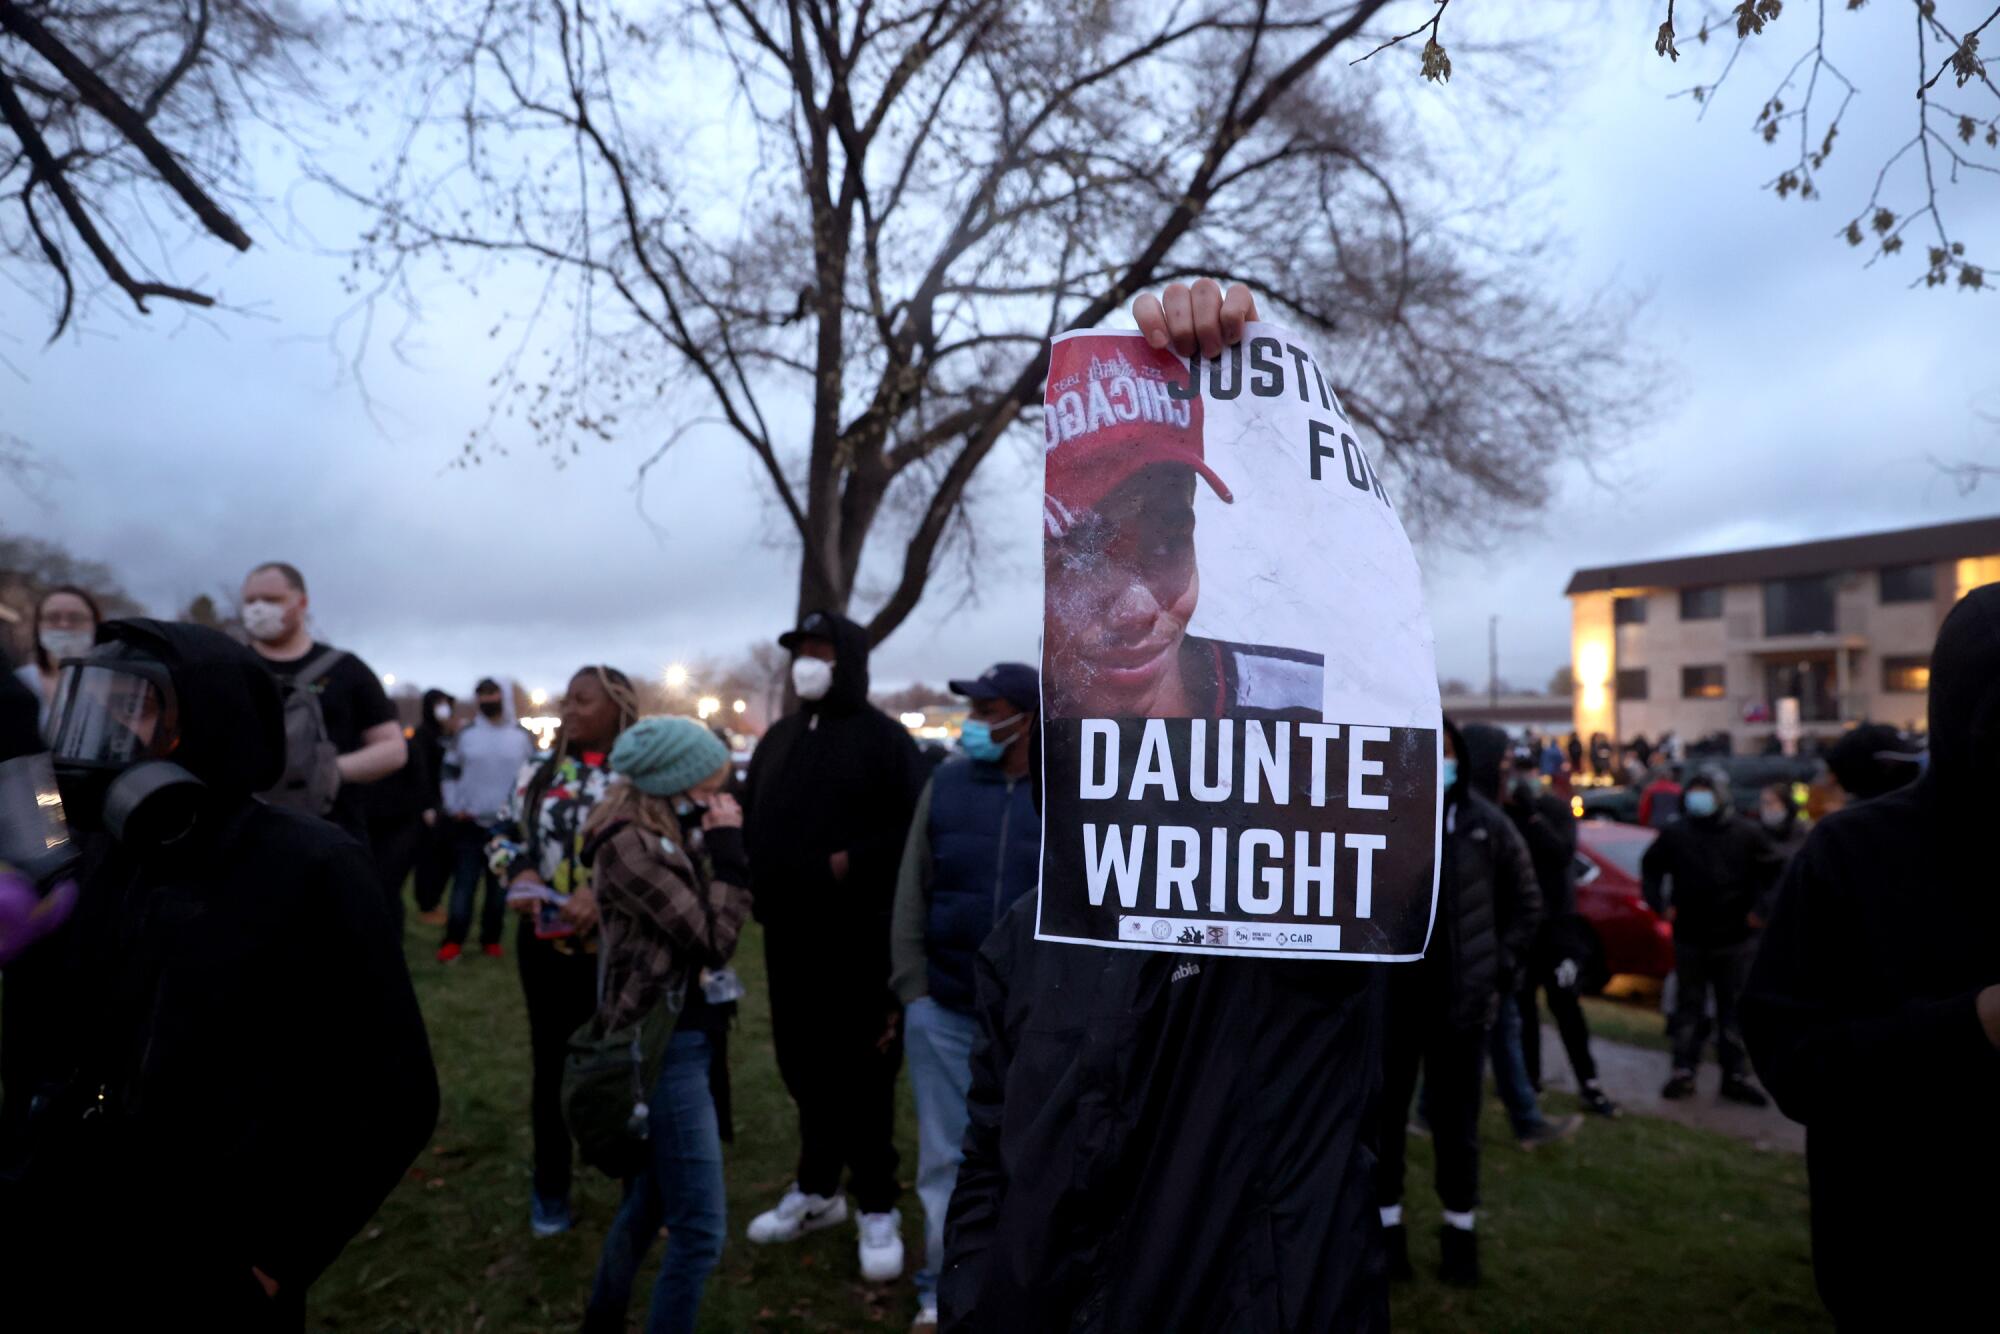 A sign held up by one person in a crowd reads "Justice for Daunte Wright"